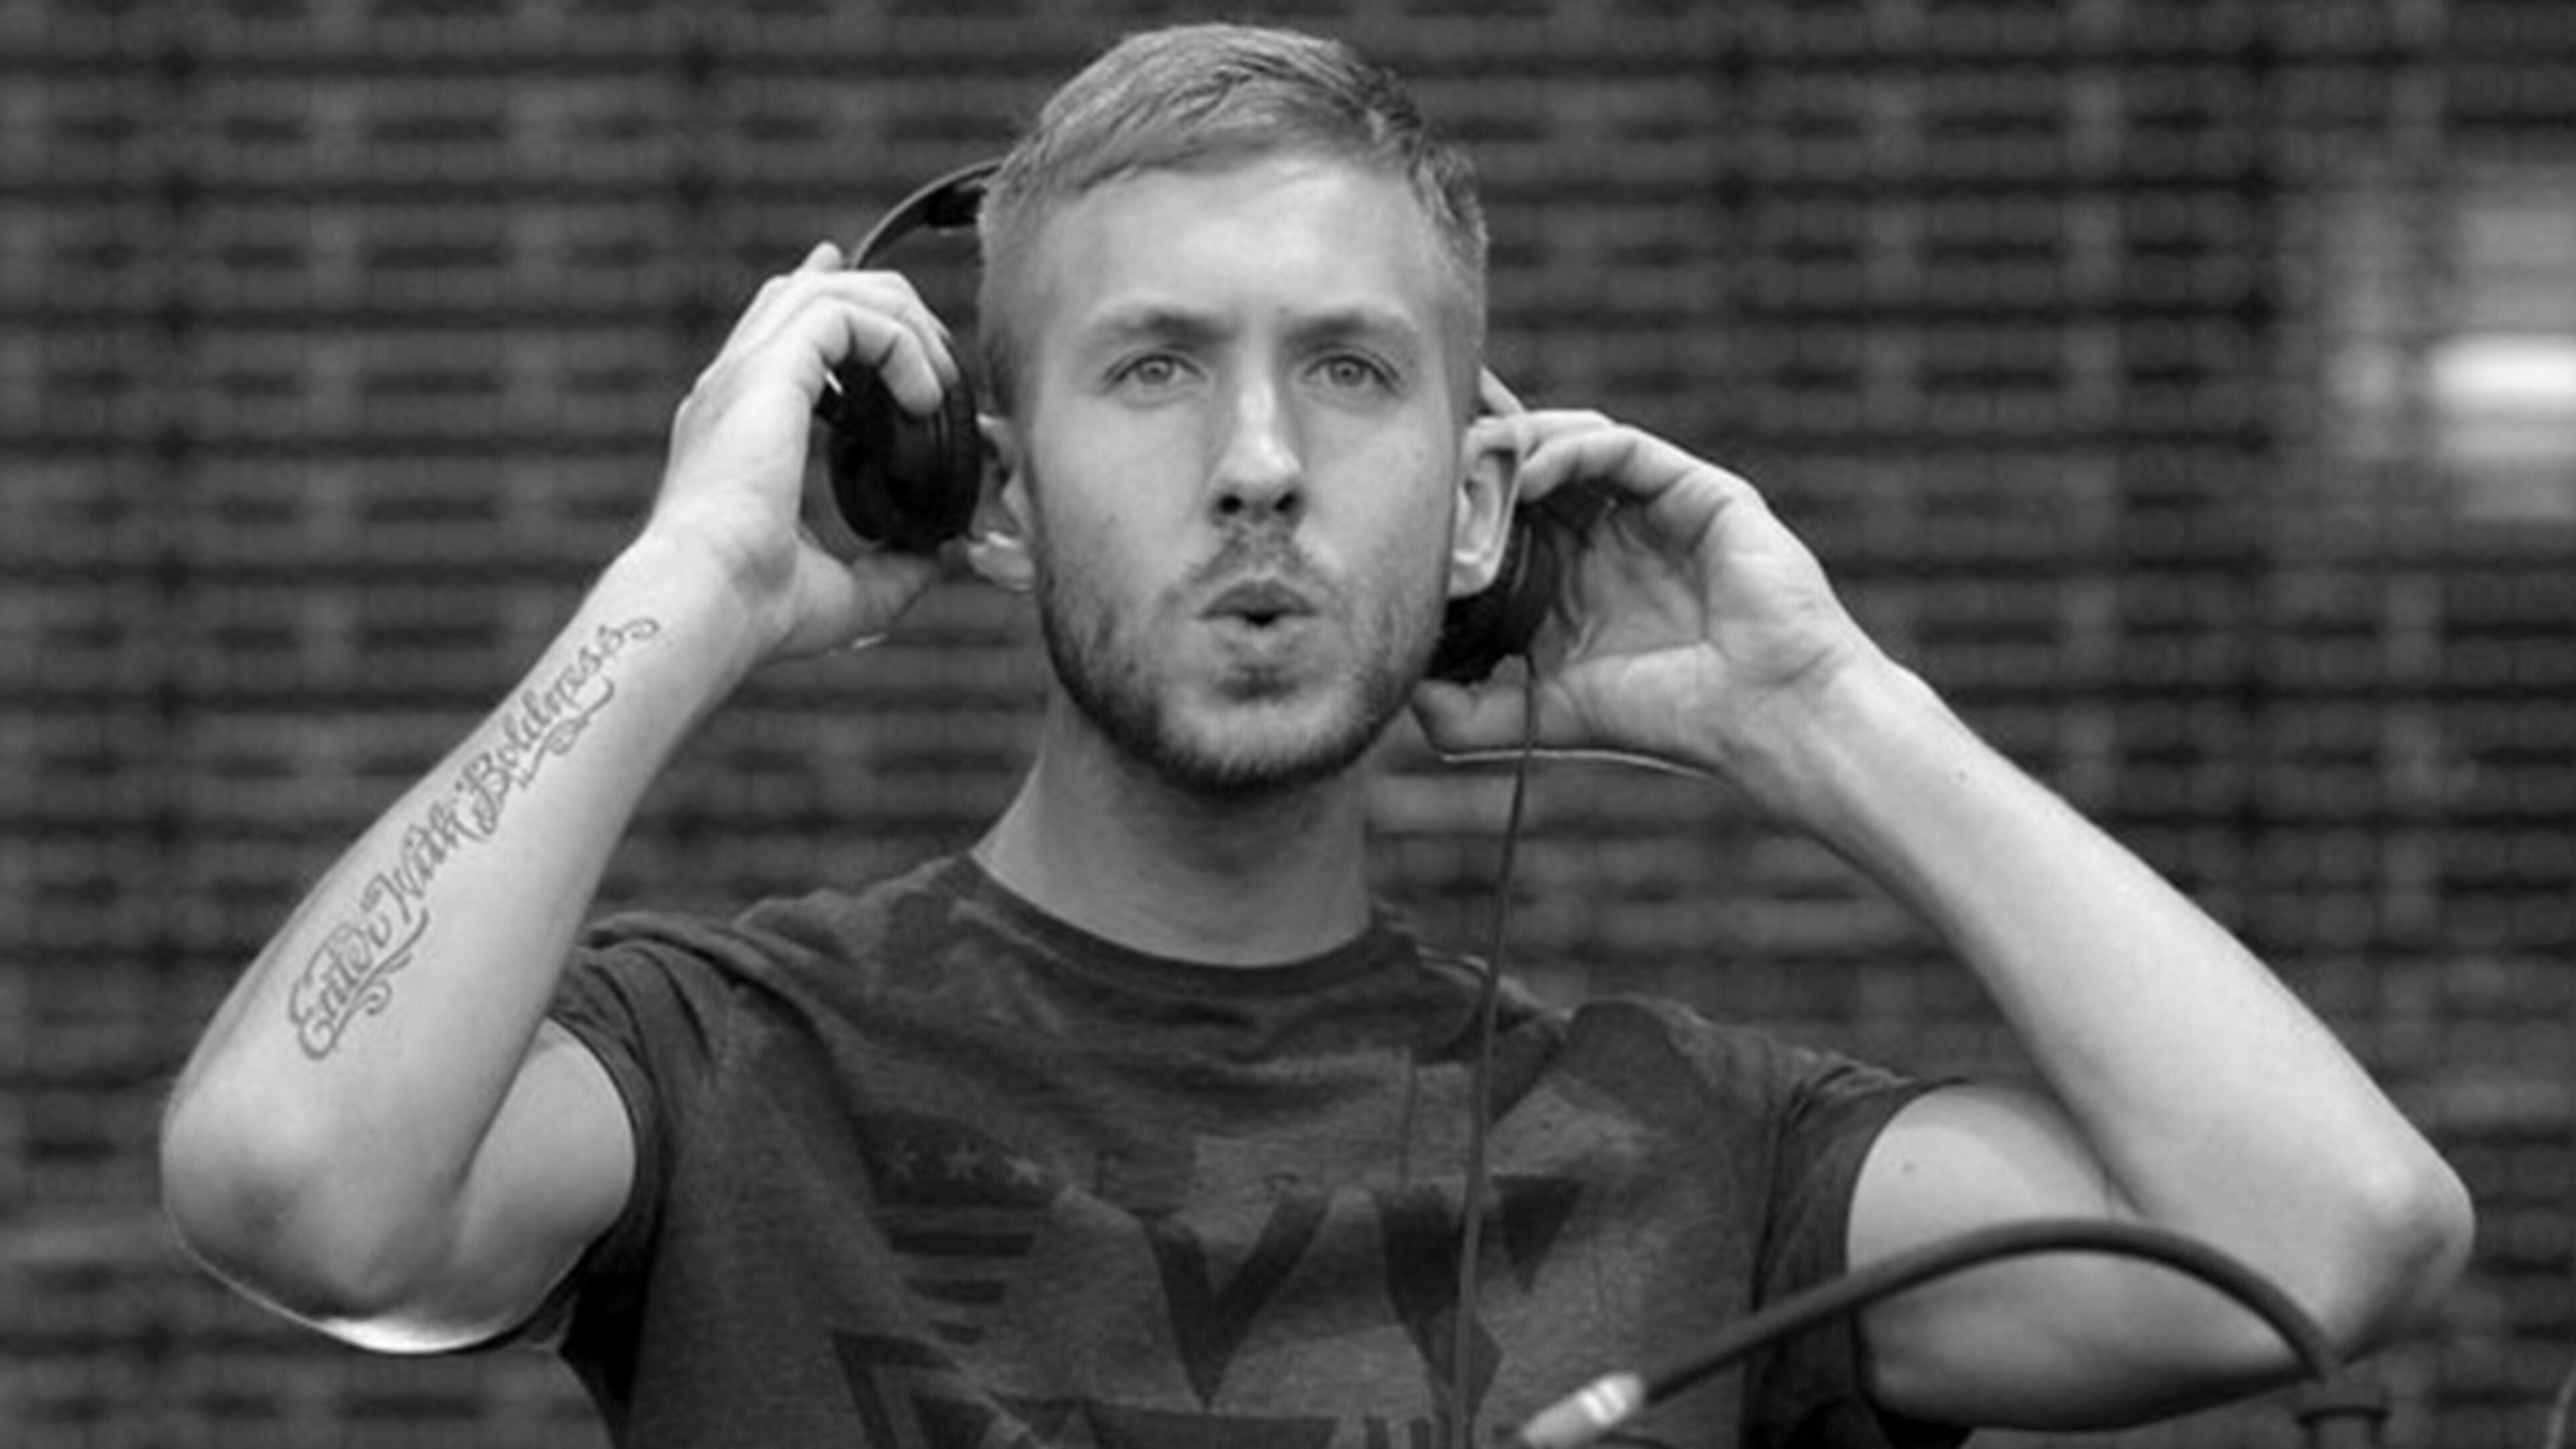 Calvin Harris: Adam Richard Wiles, a Scottish DJ, record producer, singer, and songwriter. 3840x2160 4K Background.